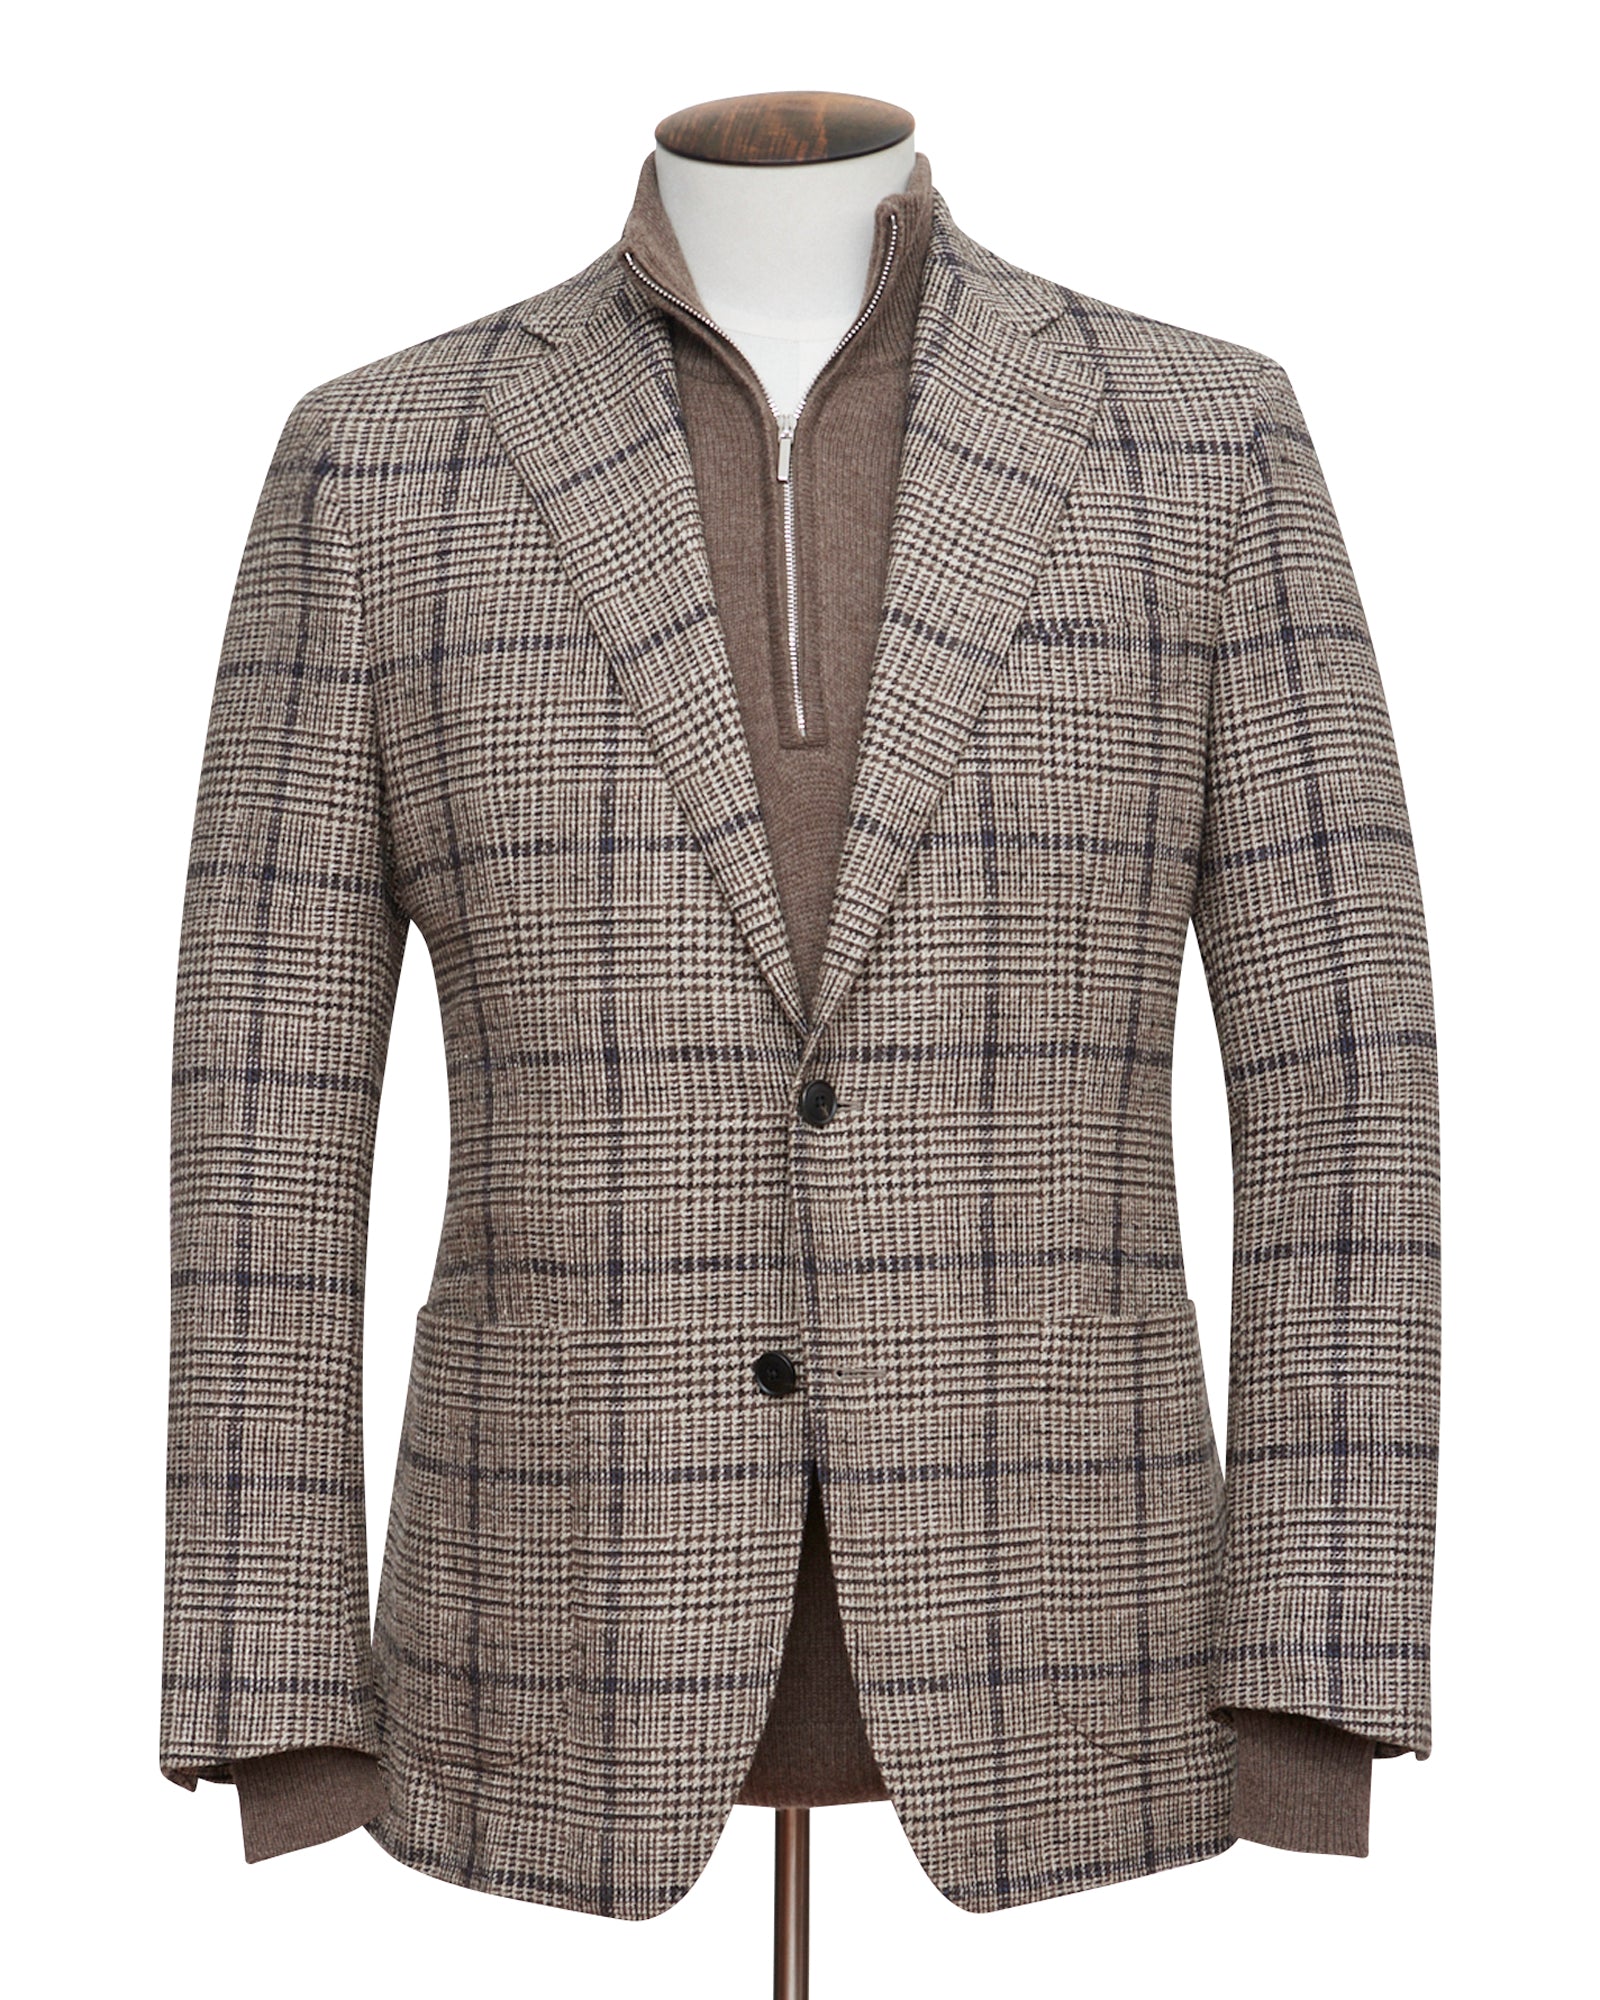 Mixed Brown Wool, Silk & Cashmere with Blue Glencheck Blazer